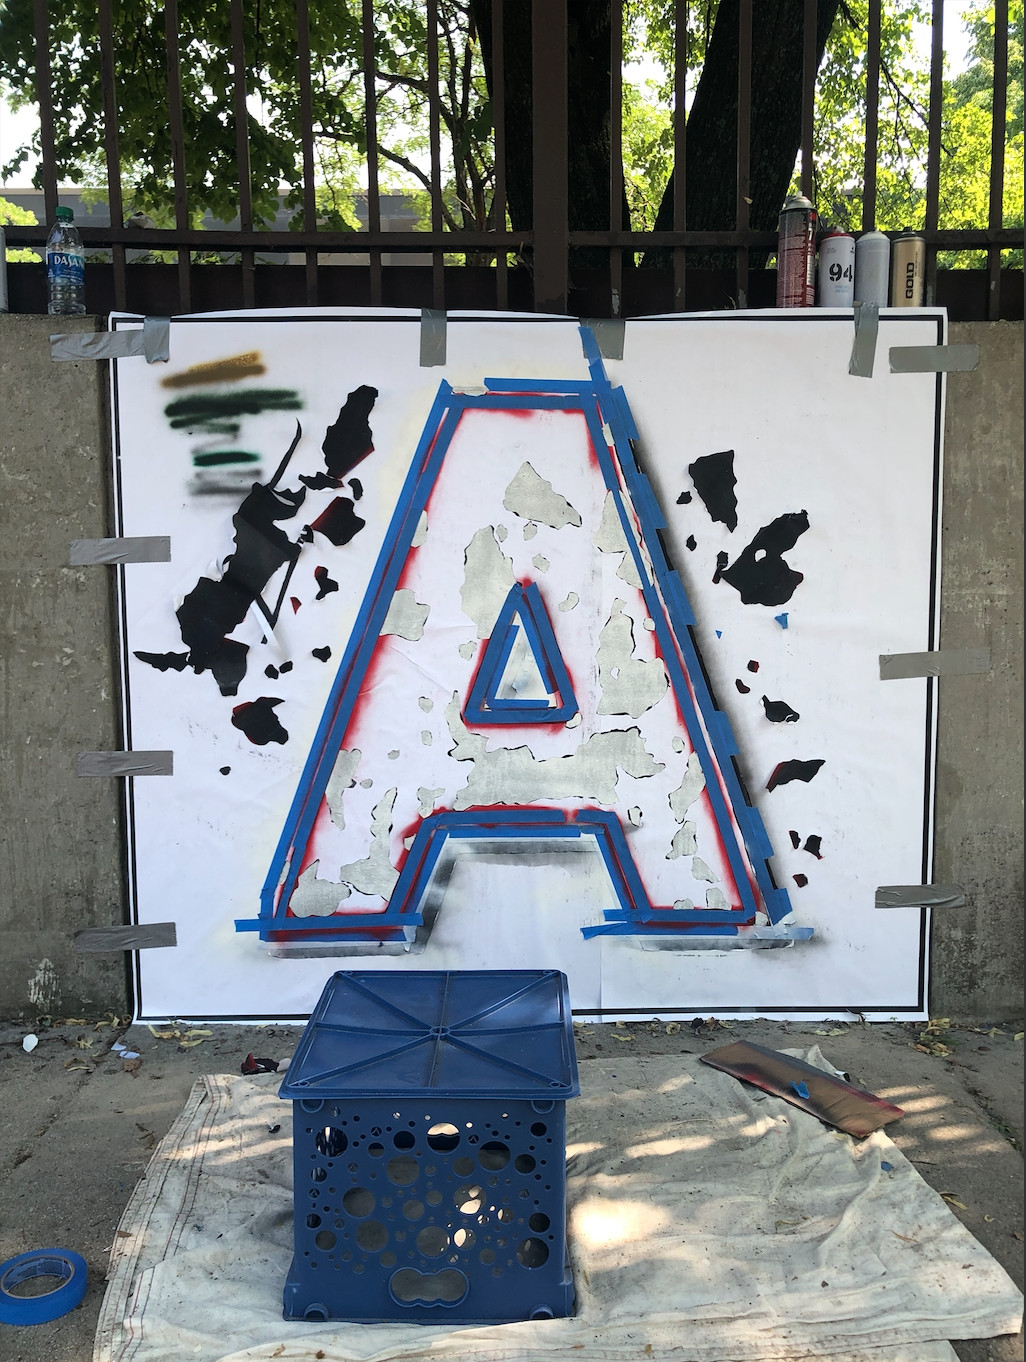 The letter “A” in “Dreams” was inspired by the Aragon Ballroom. It’s part of Left Handed Wave’s mural, “Beyond Human Dreams of Loveliness,” completed on June 24, 2020.